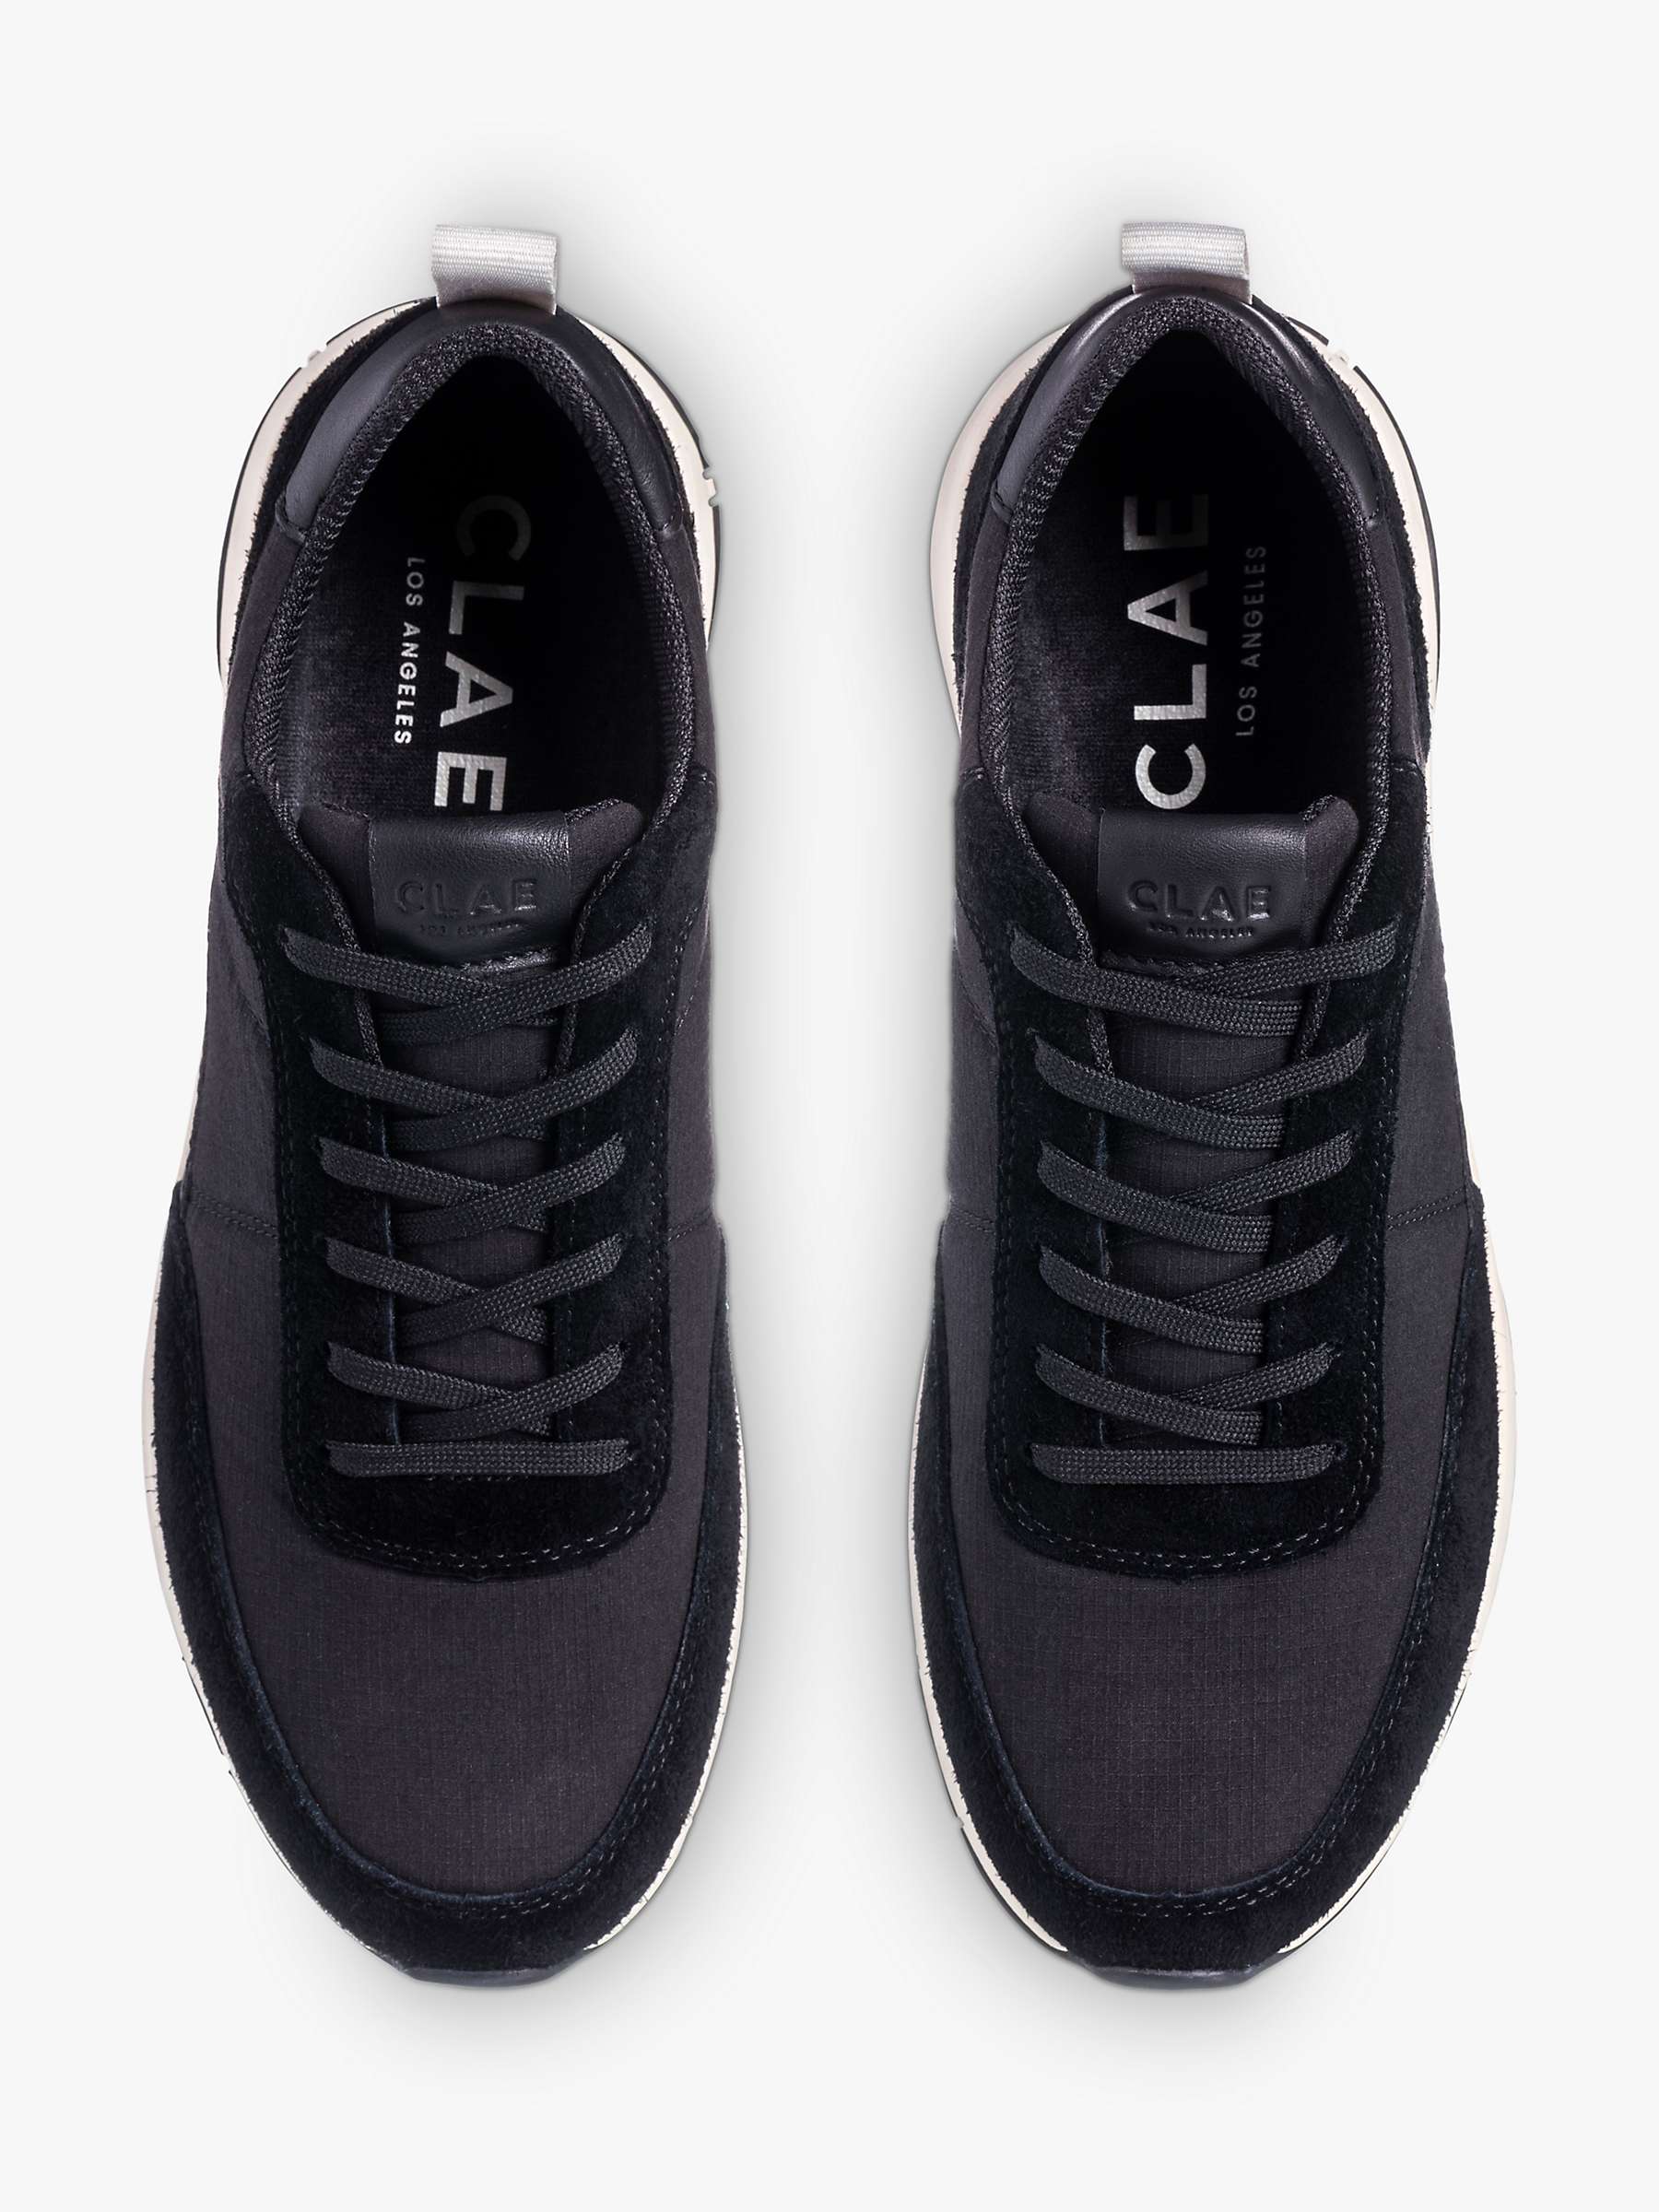 Buy CLAE Owens Suede Lace Up Trainers Online at johnlewis.com